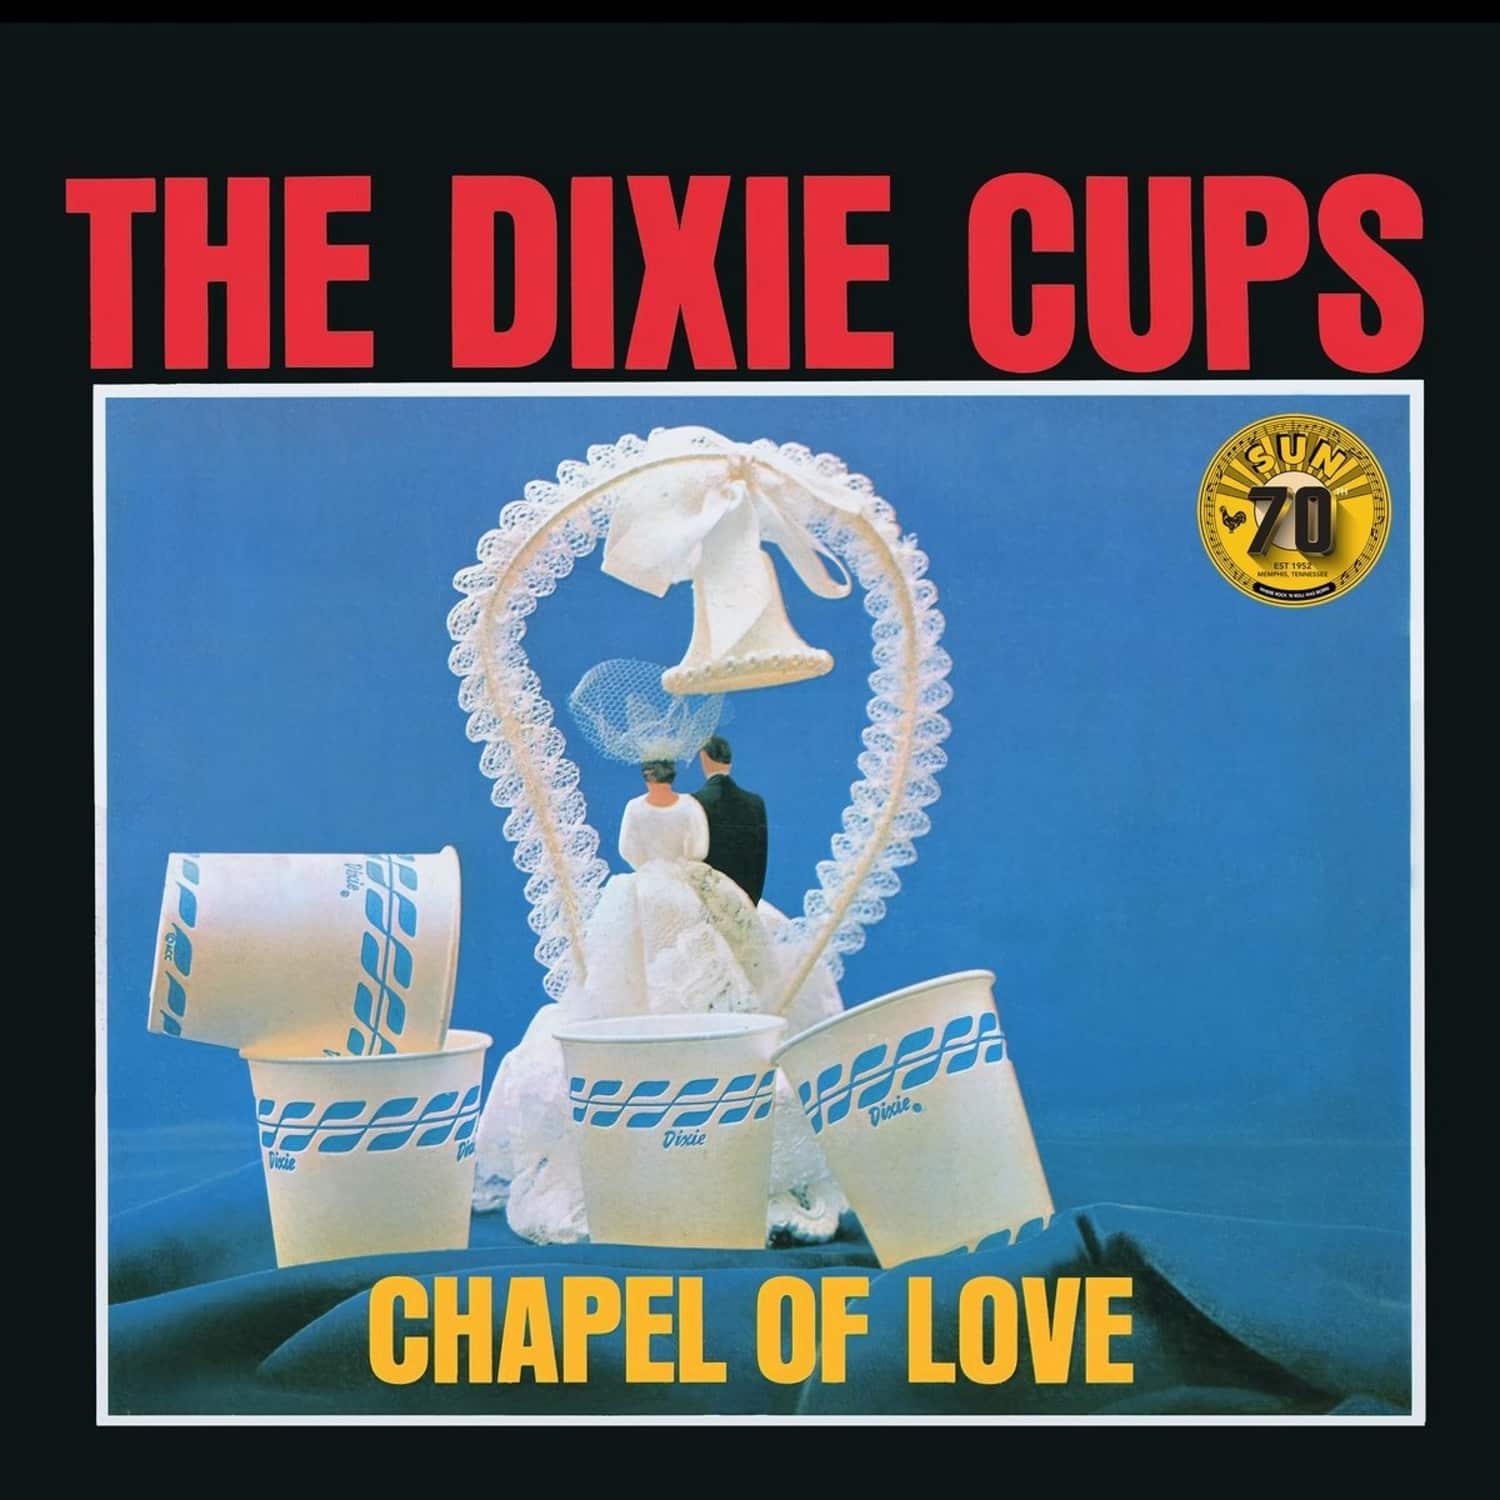  The Dixie Cups - CHANNEL OF LOVE 